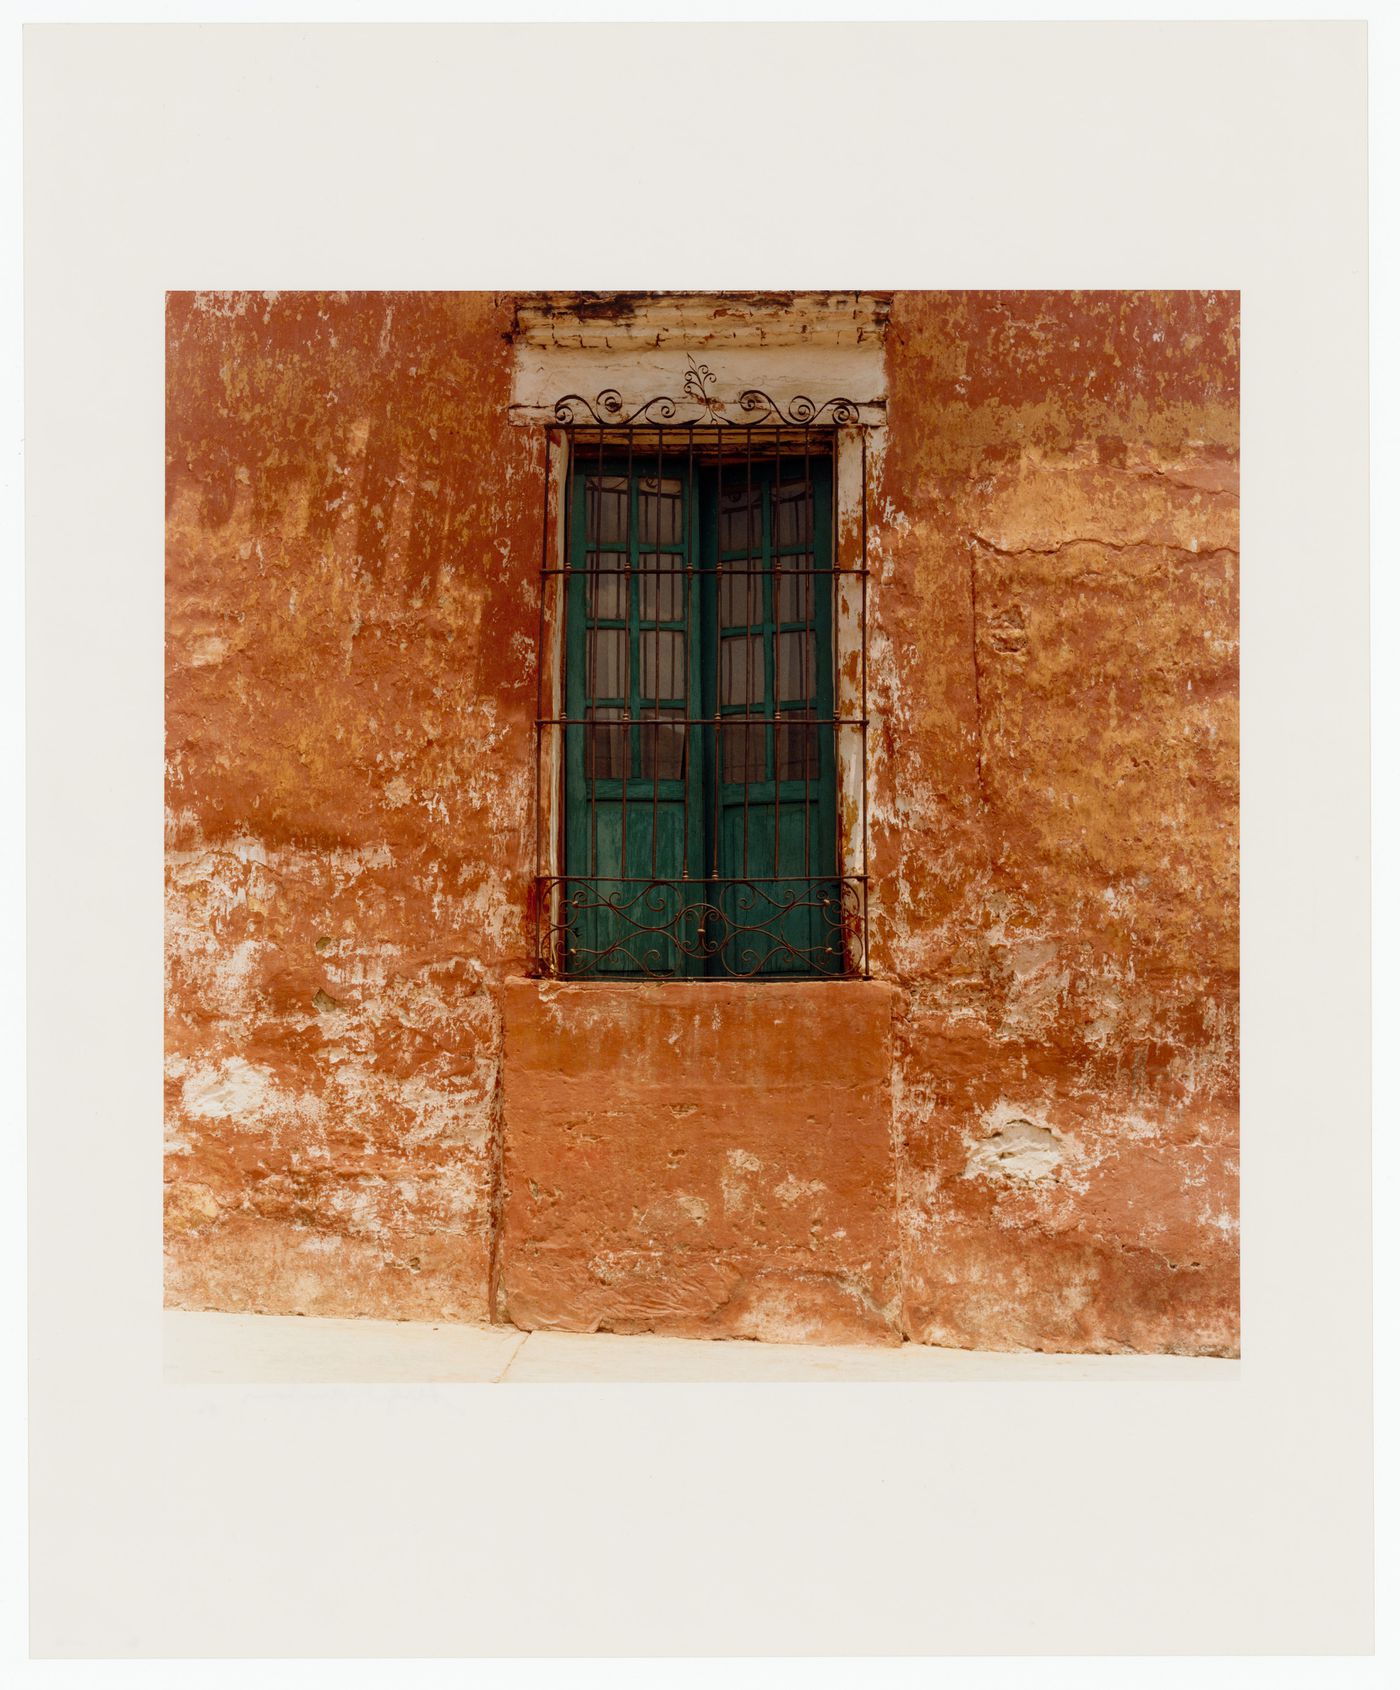 View of a balconet showing doors covered by a wrought iron grille, Oaxaca, Mexico